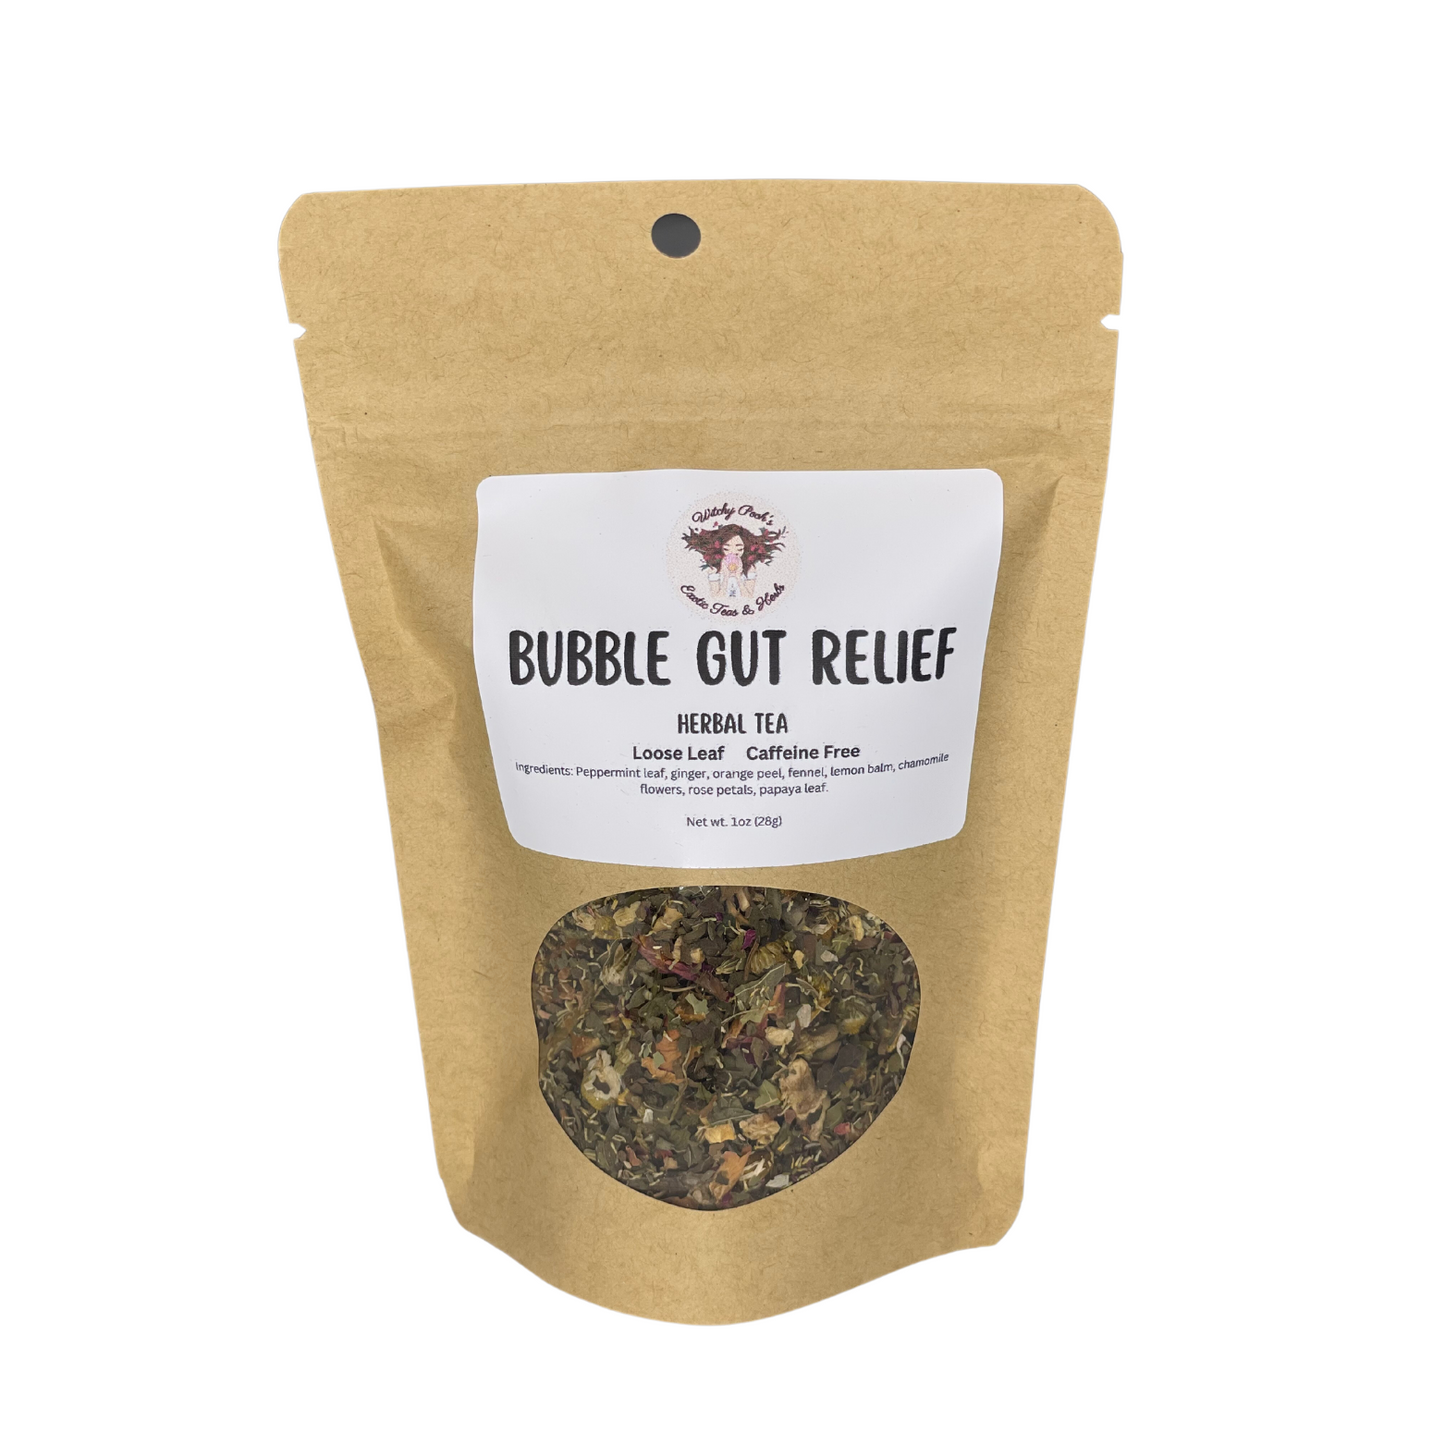 Witchy Pooh's Bubble Gut Relief Loose Leaf Herbal Functional Tea, Caffeine Free, For Digestive Issues-4